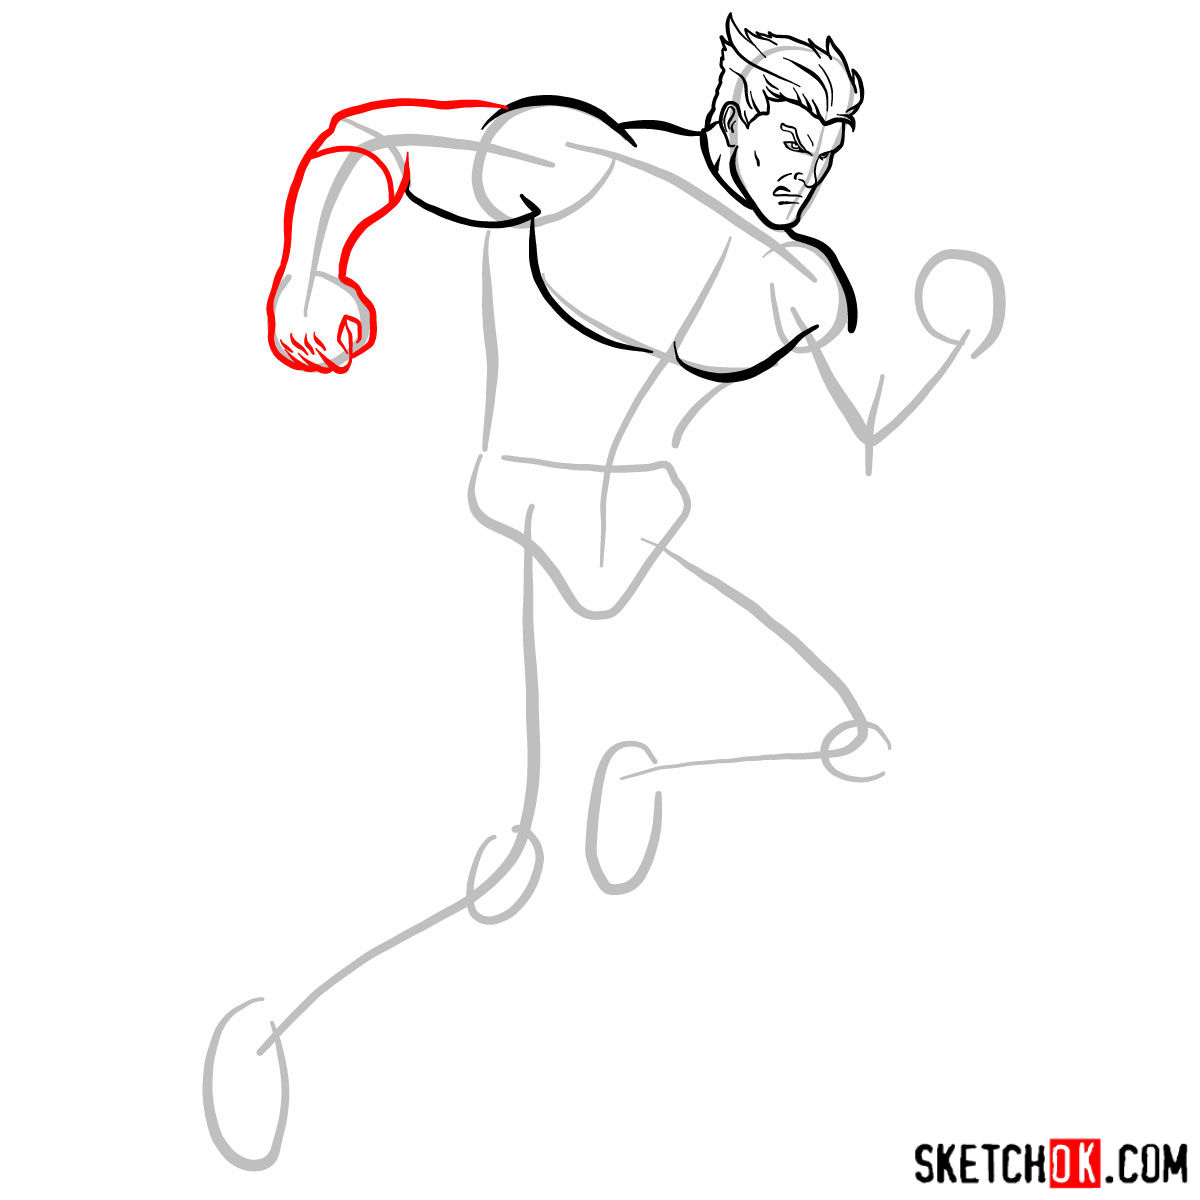 How to draw Quicksilver from Marvel Comics - step 06